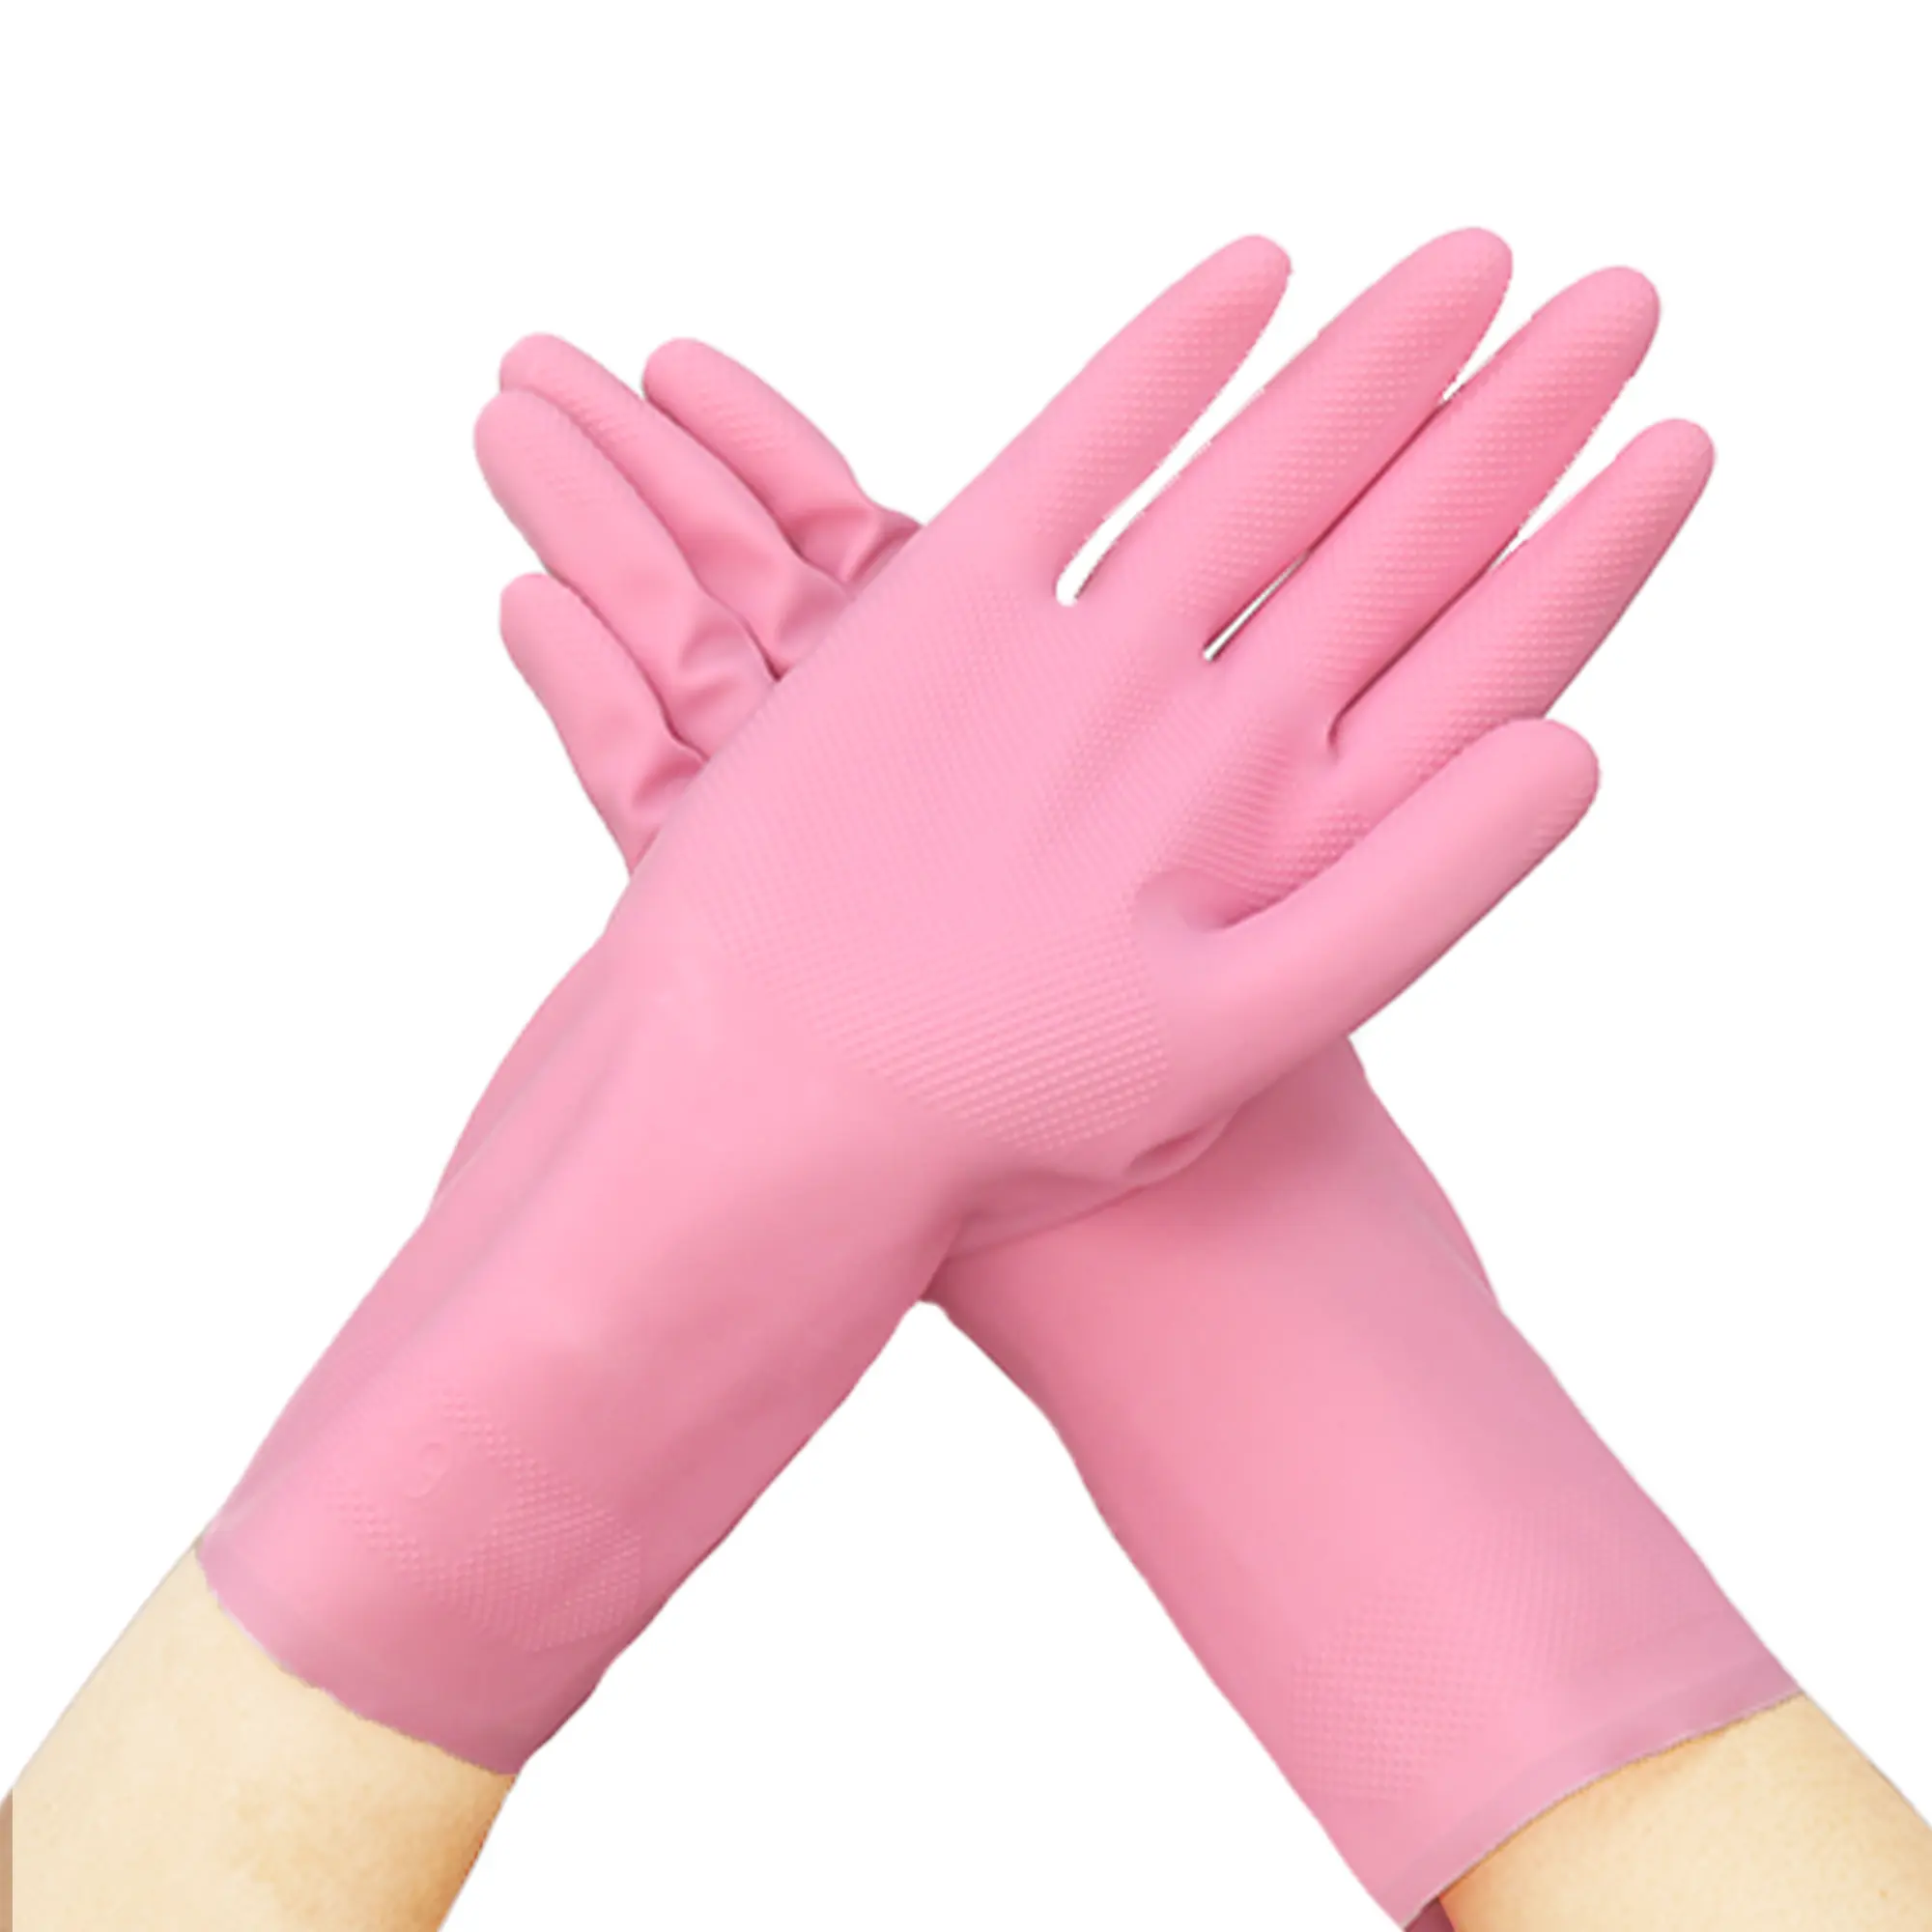 Household gloves outdoor latex pink rubber glove. Waterproof dishwashing gloves. High quality cleaning gloves  Grade B Offer 